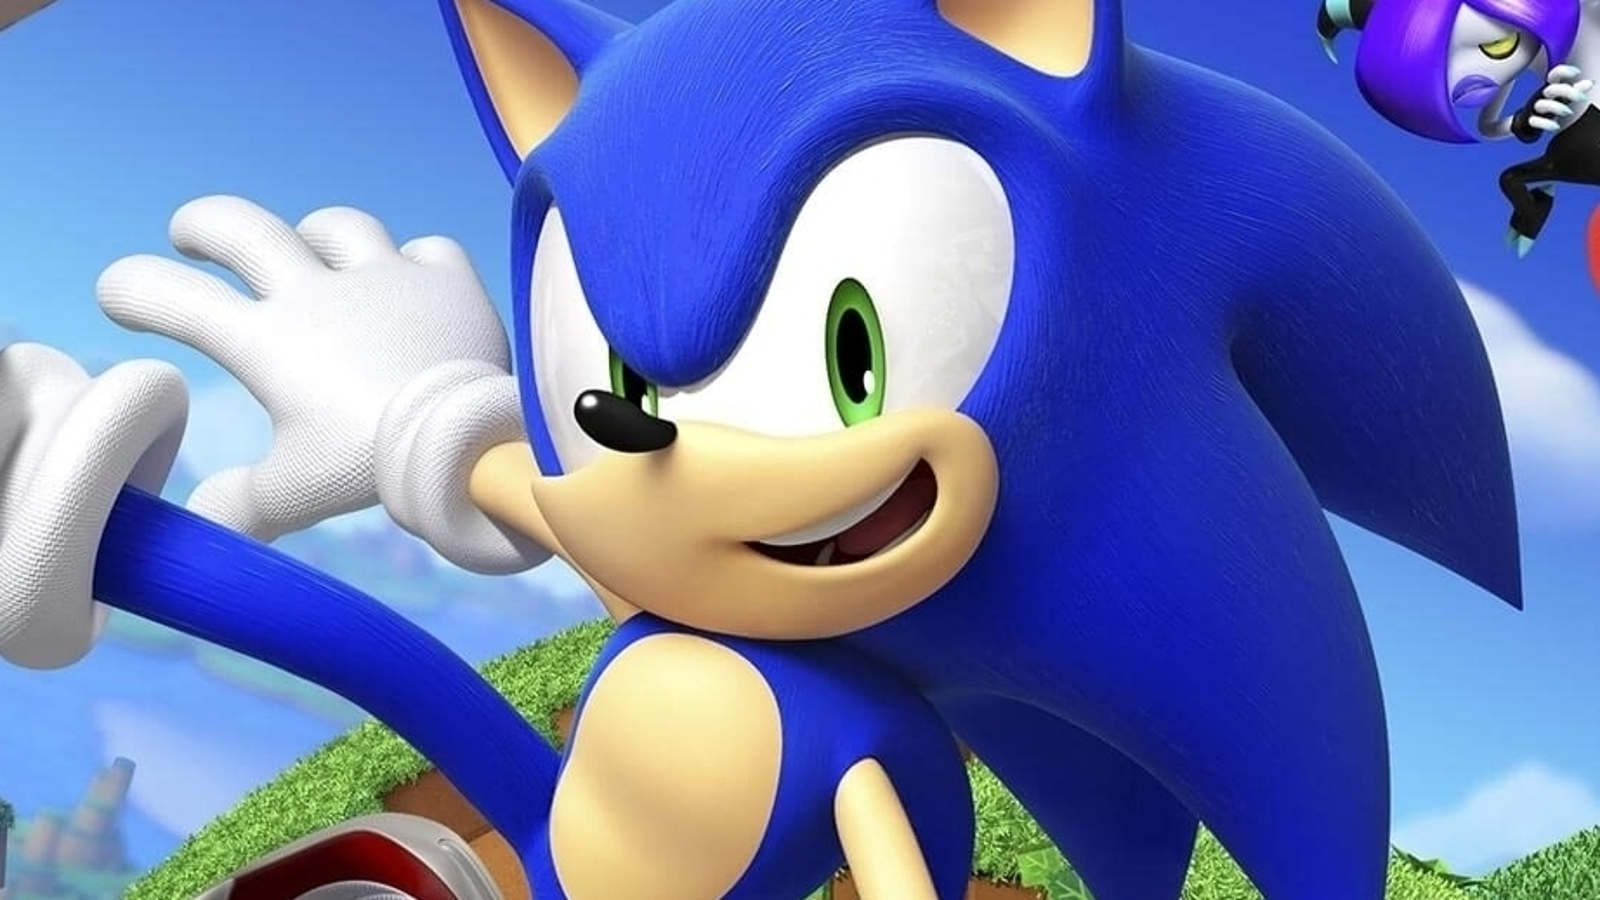 Sonic The Hedgehog's 30th Anniversary and Super Mario 64's 25th  Anniversary! : Free Download, Borrow, and Streaming : Internet Archive